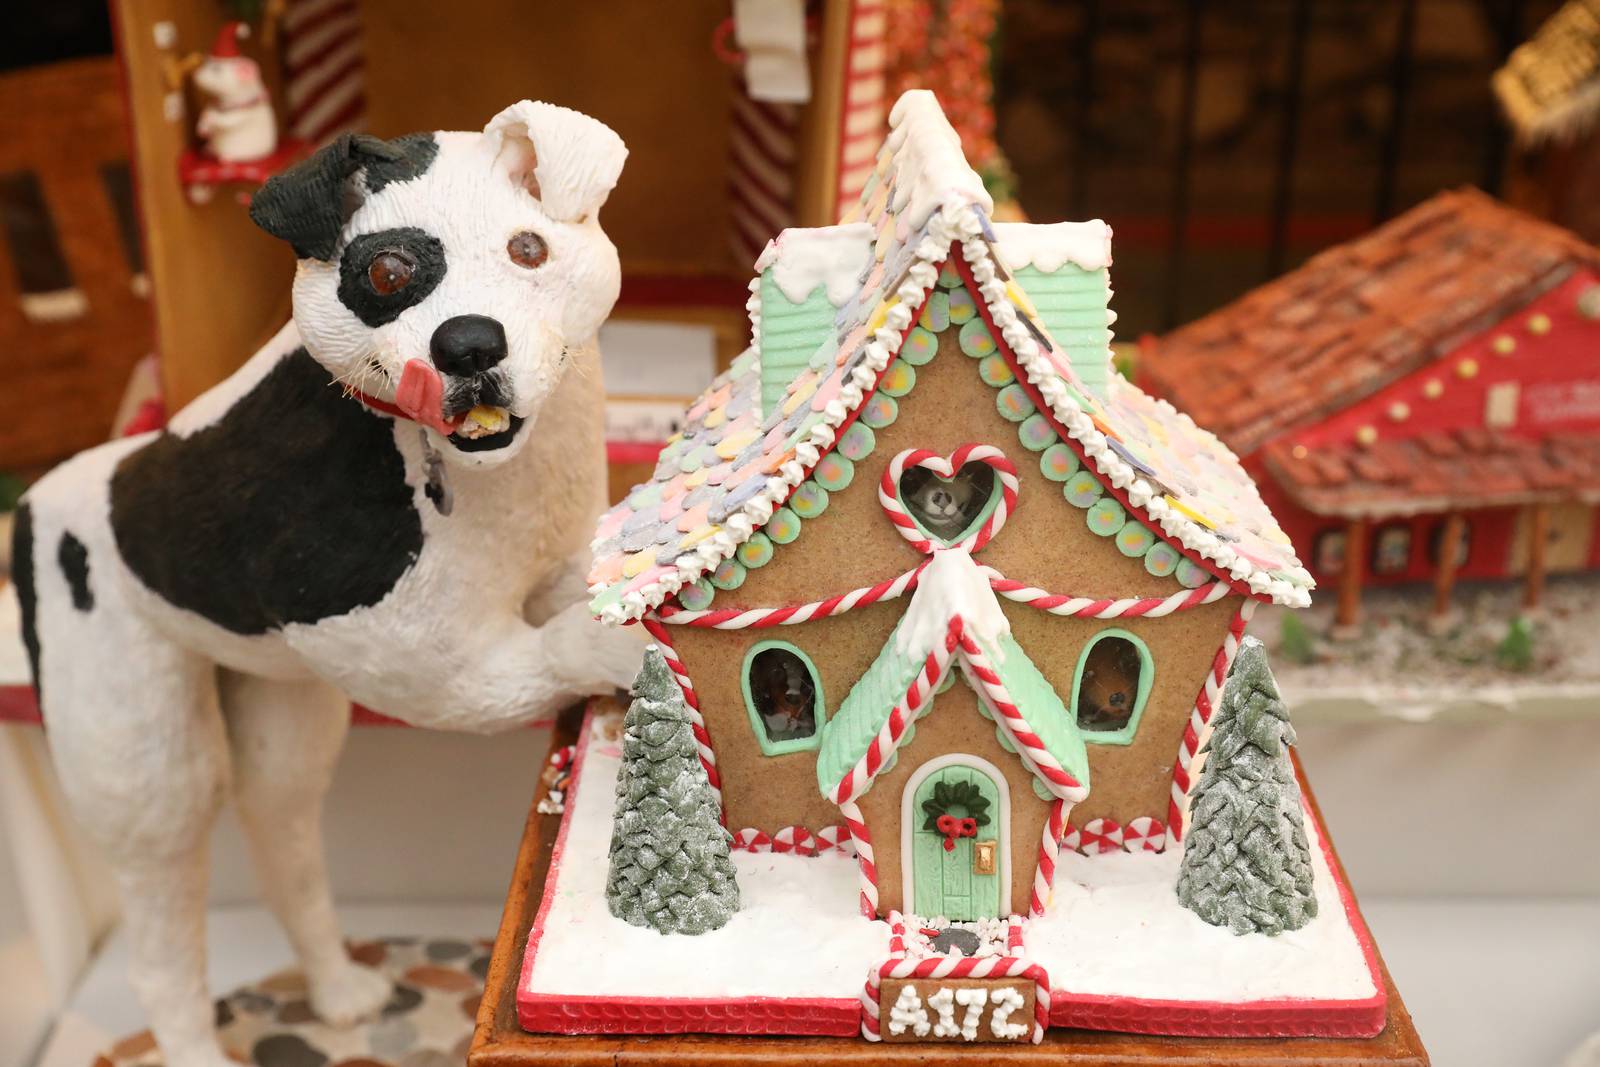 PHOTOS See National Gingerbread House Competition winner at Grove Park